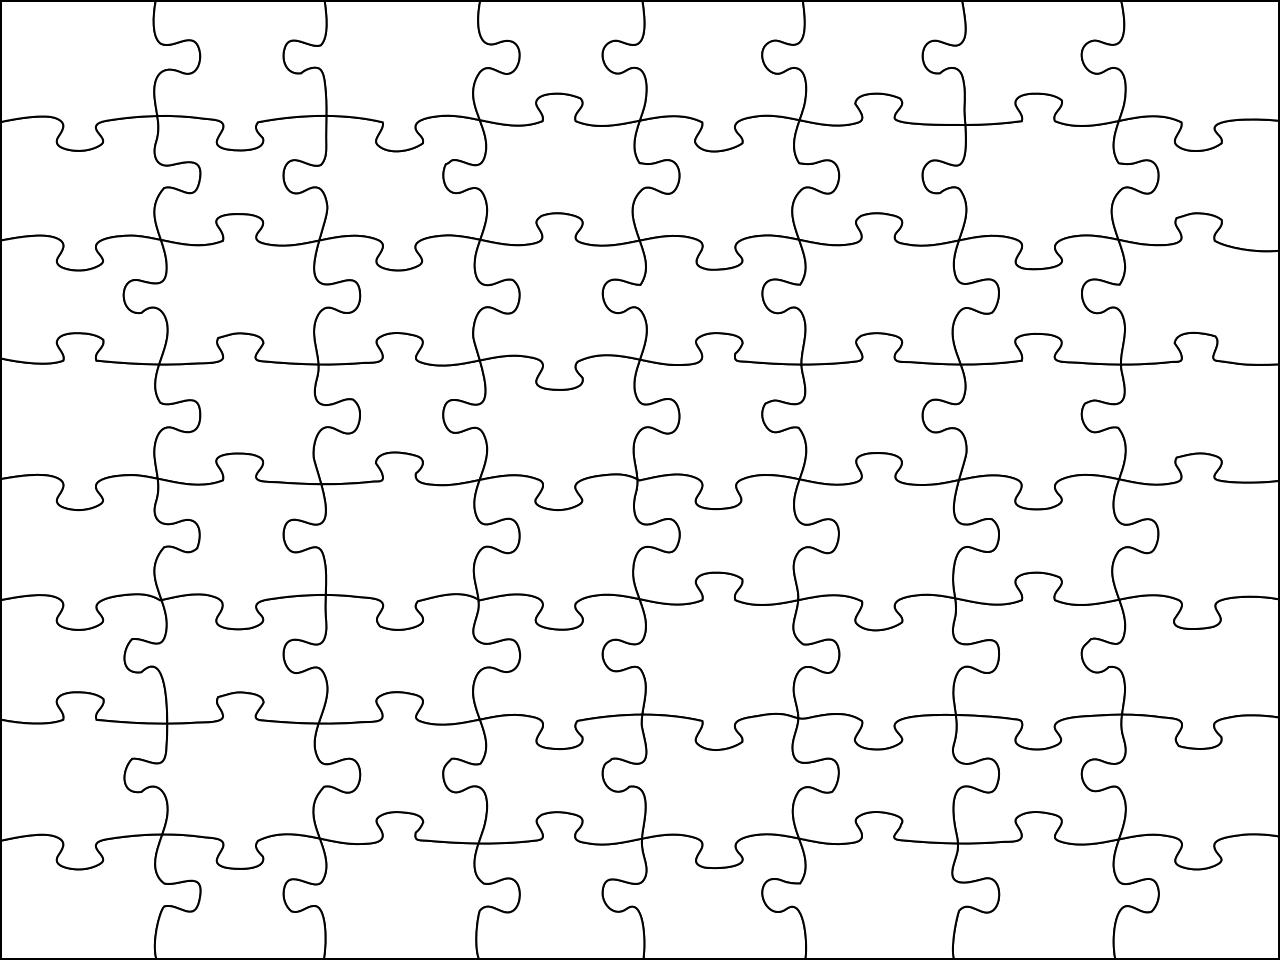 Jigsaw Puzzle Maker Free Printable | Free Printables - Printable Jigsaw Puzzle Maker Software